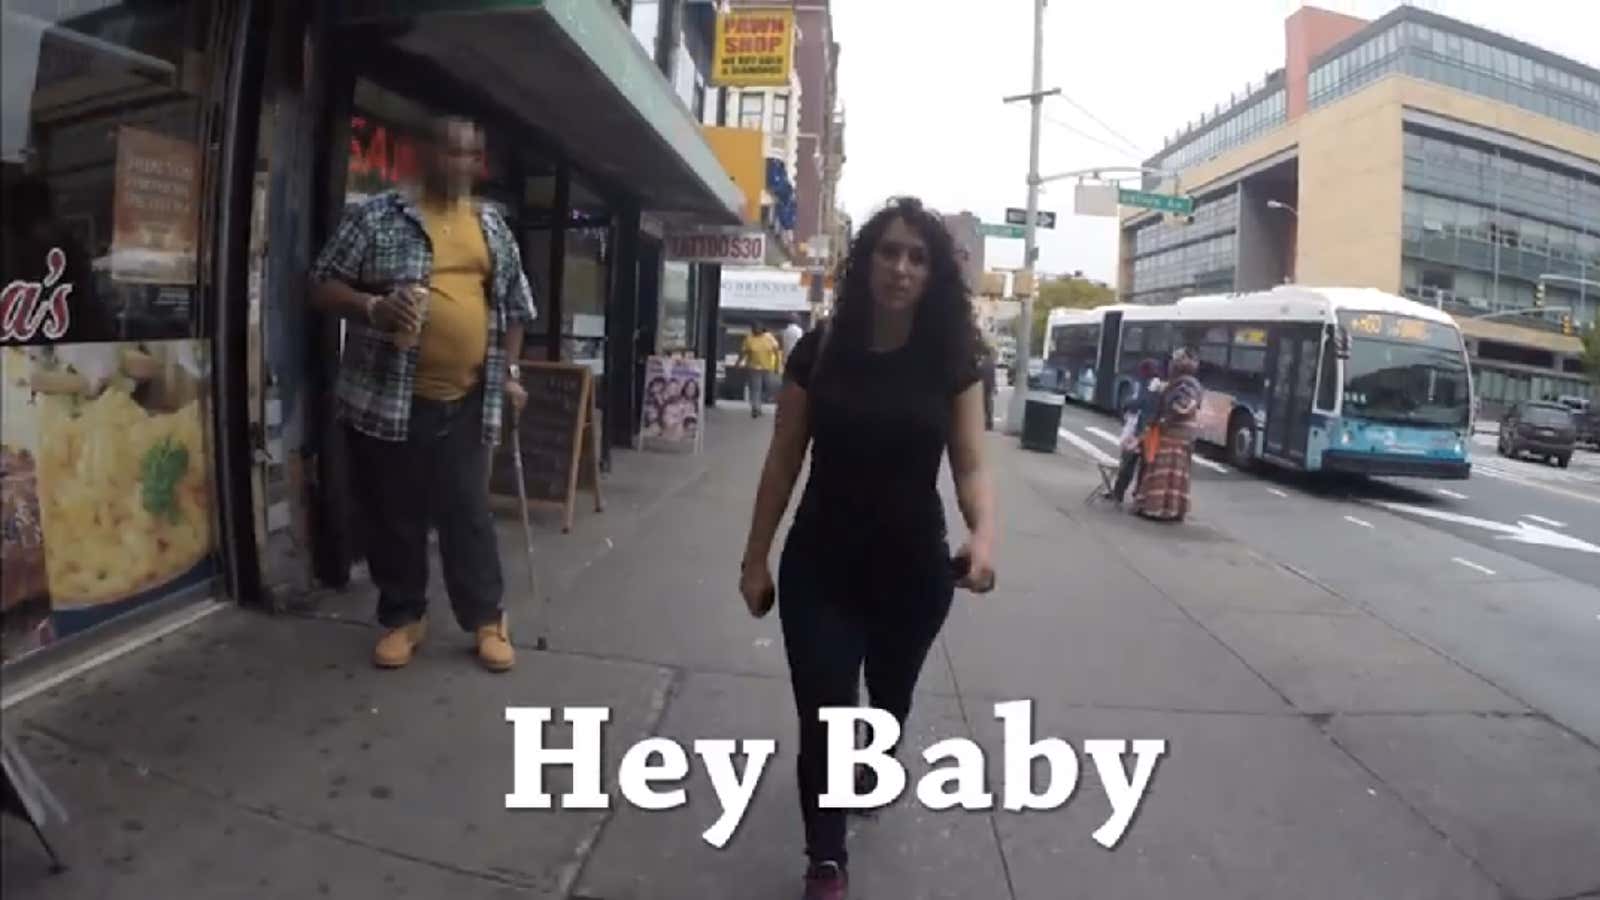 A still from the viral “catcalling video.”